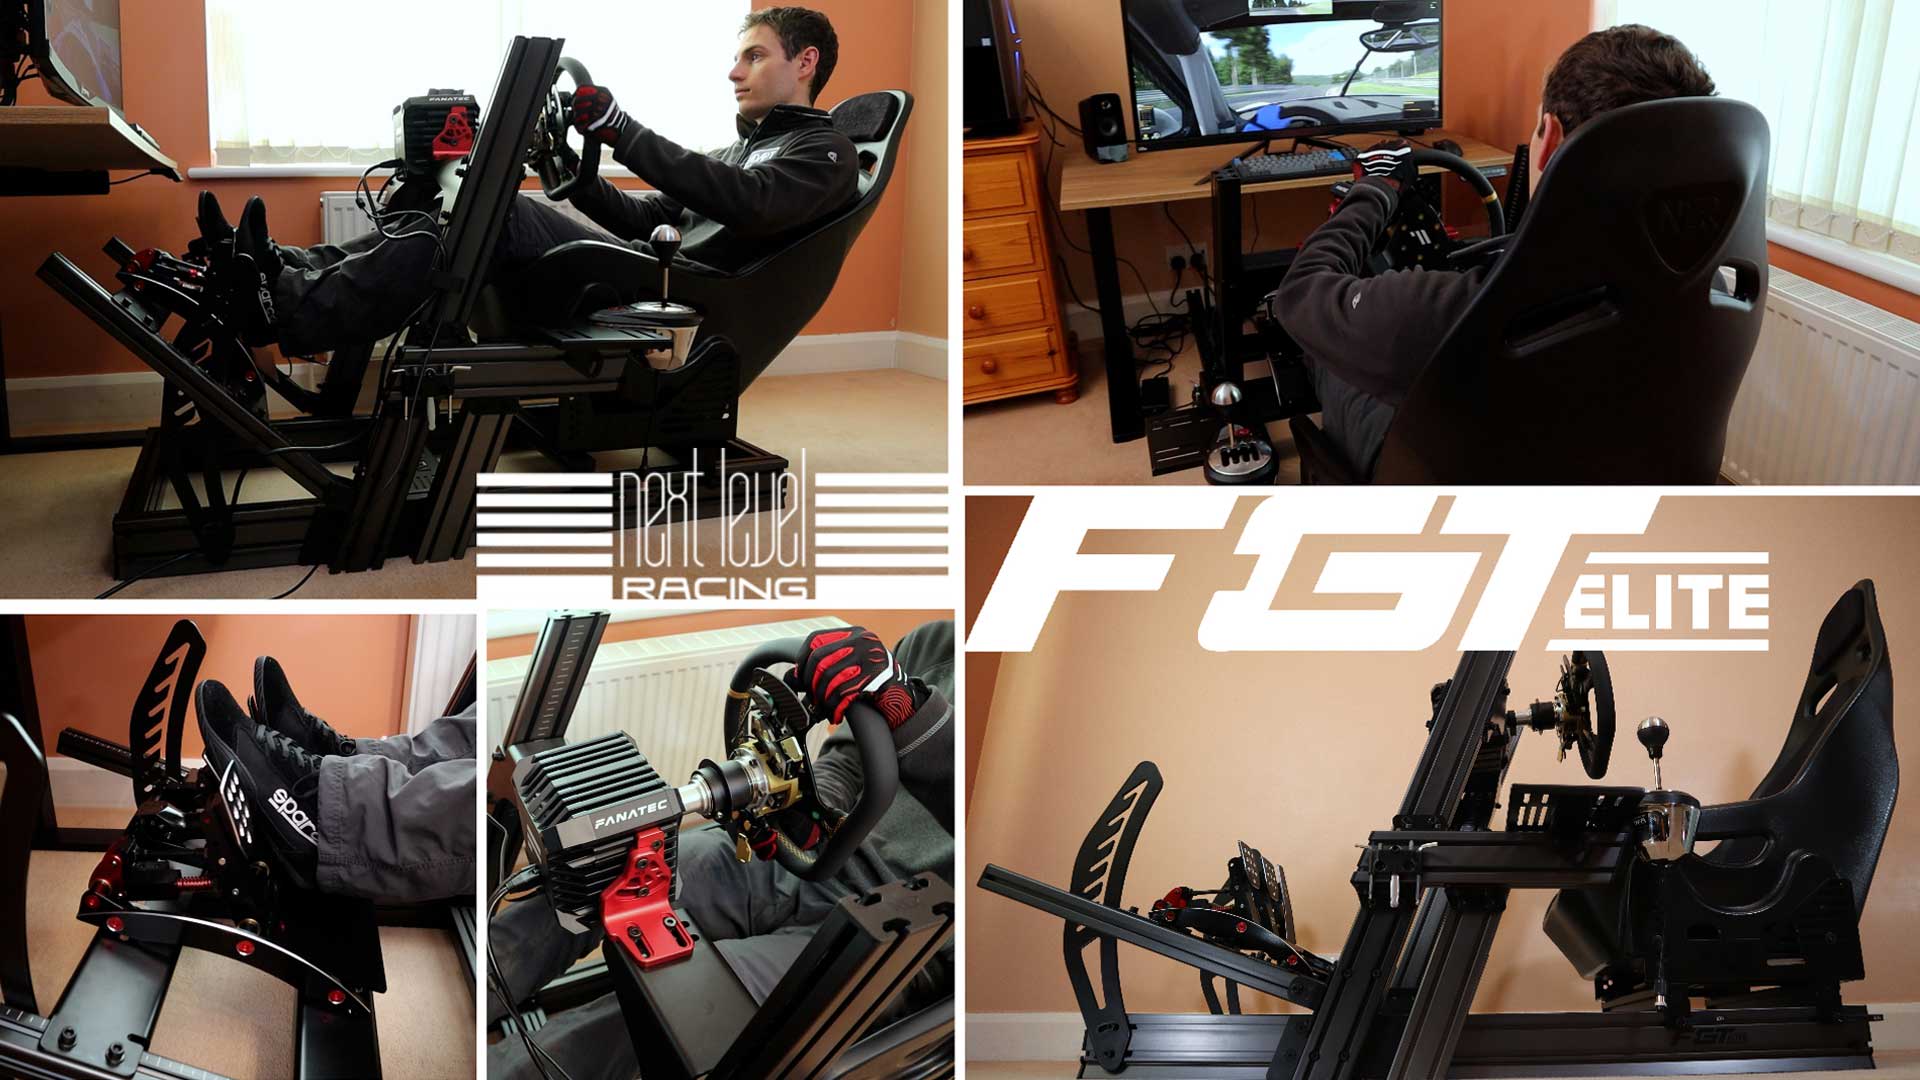 F-GT Elite iRacing Edition - Next Level Racing